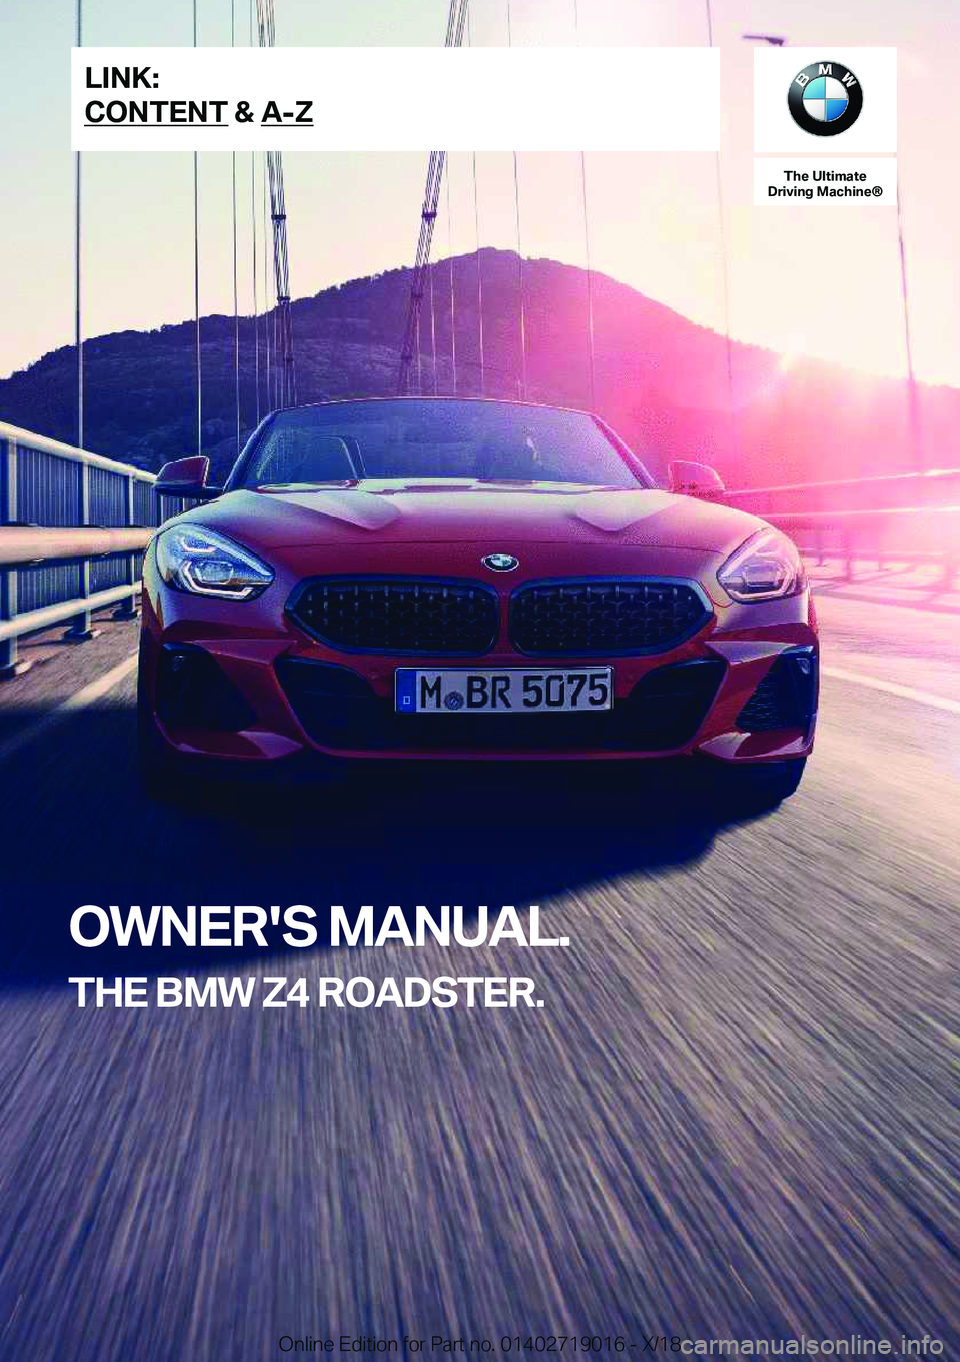 BMW Z4 2019  Owners Manual �T�h�e��U�l�t�i�m�a�t�e
�D�r�i�v�i�n�g��M�a�c�h�i�n�e�n
�O�W�N�E�R�'�S��M�A�N�U�A�L�.
�T�H�E��B�M�W��Z�4��R�O�A�D�S�T�E�R�.�L�I�N�K�:
�C�O�N�T�E�N�T��&��A�-�Z�O�n�l�i�n�e��E�d�i�t�i�o�n�